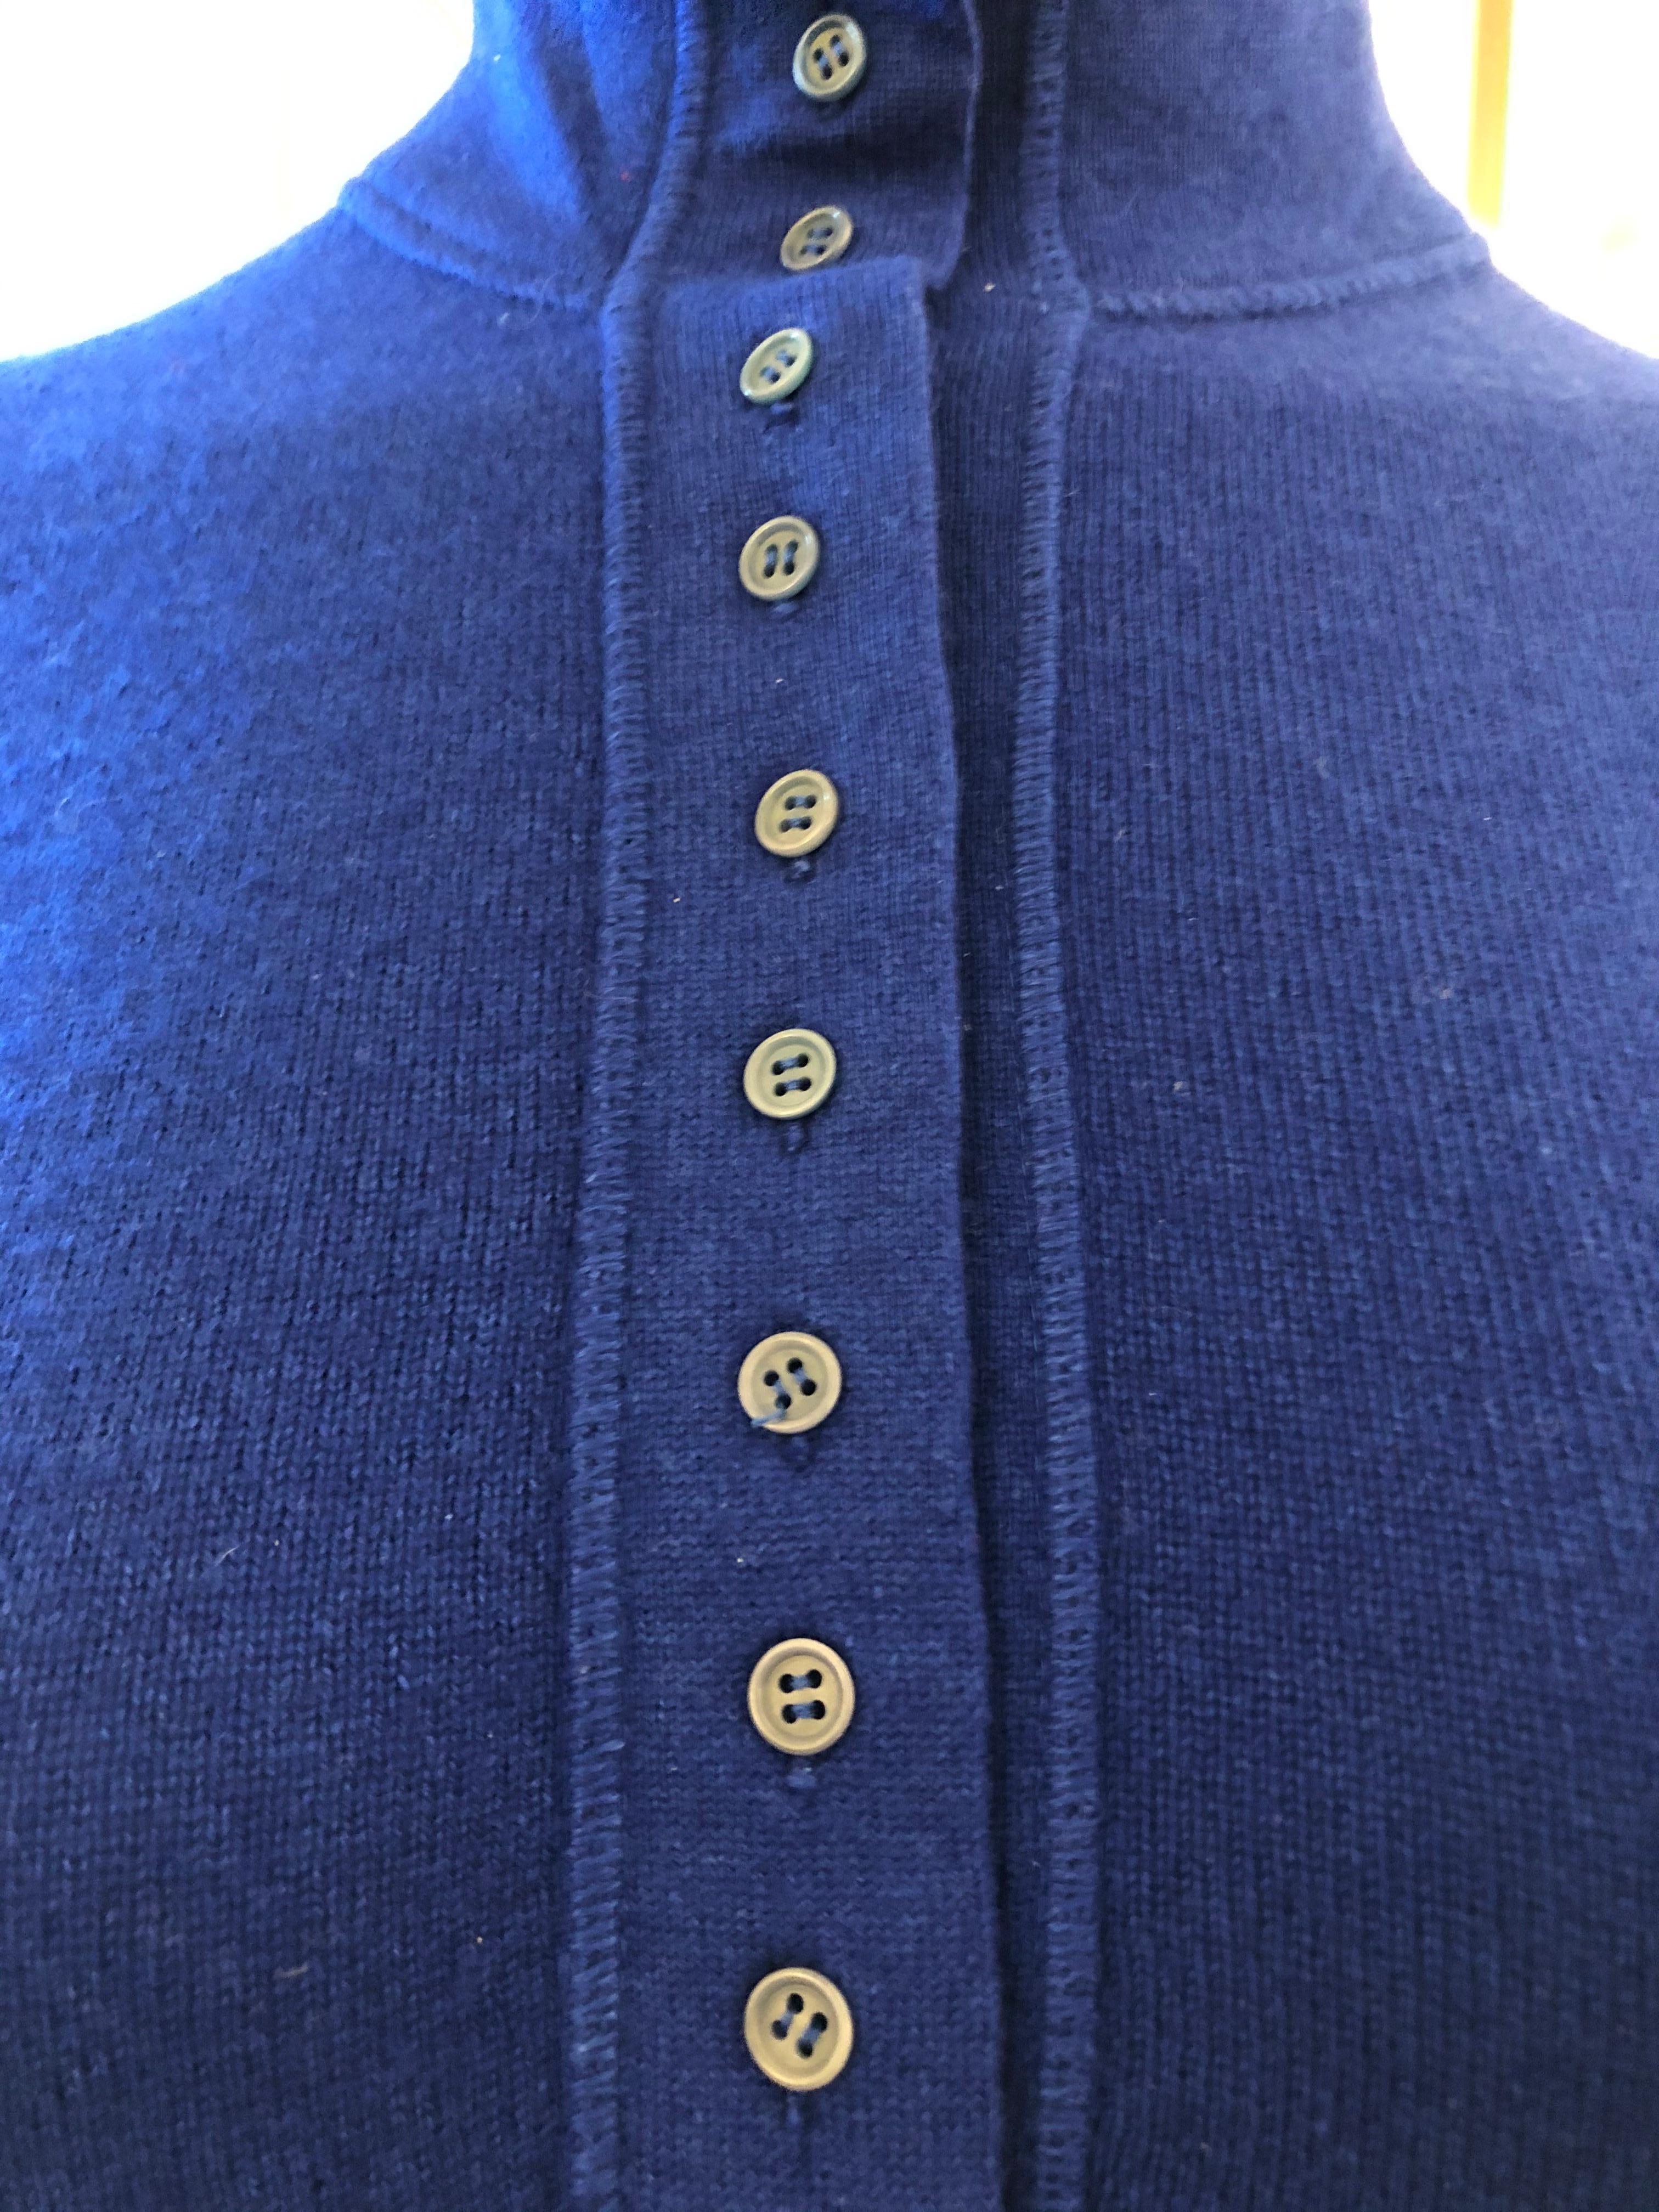 Women's Brunello Cucinelli Royal Blue High Necked Cashmere and Silk Sweater M+